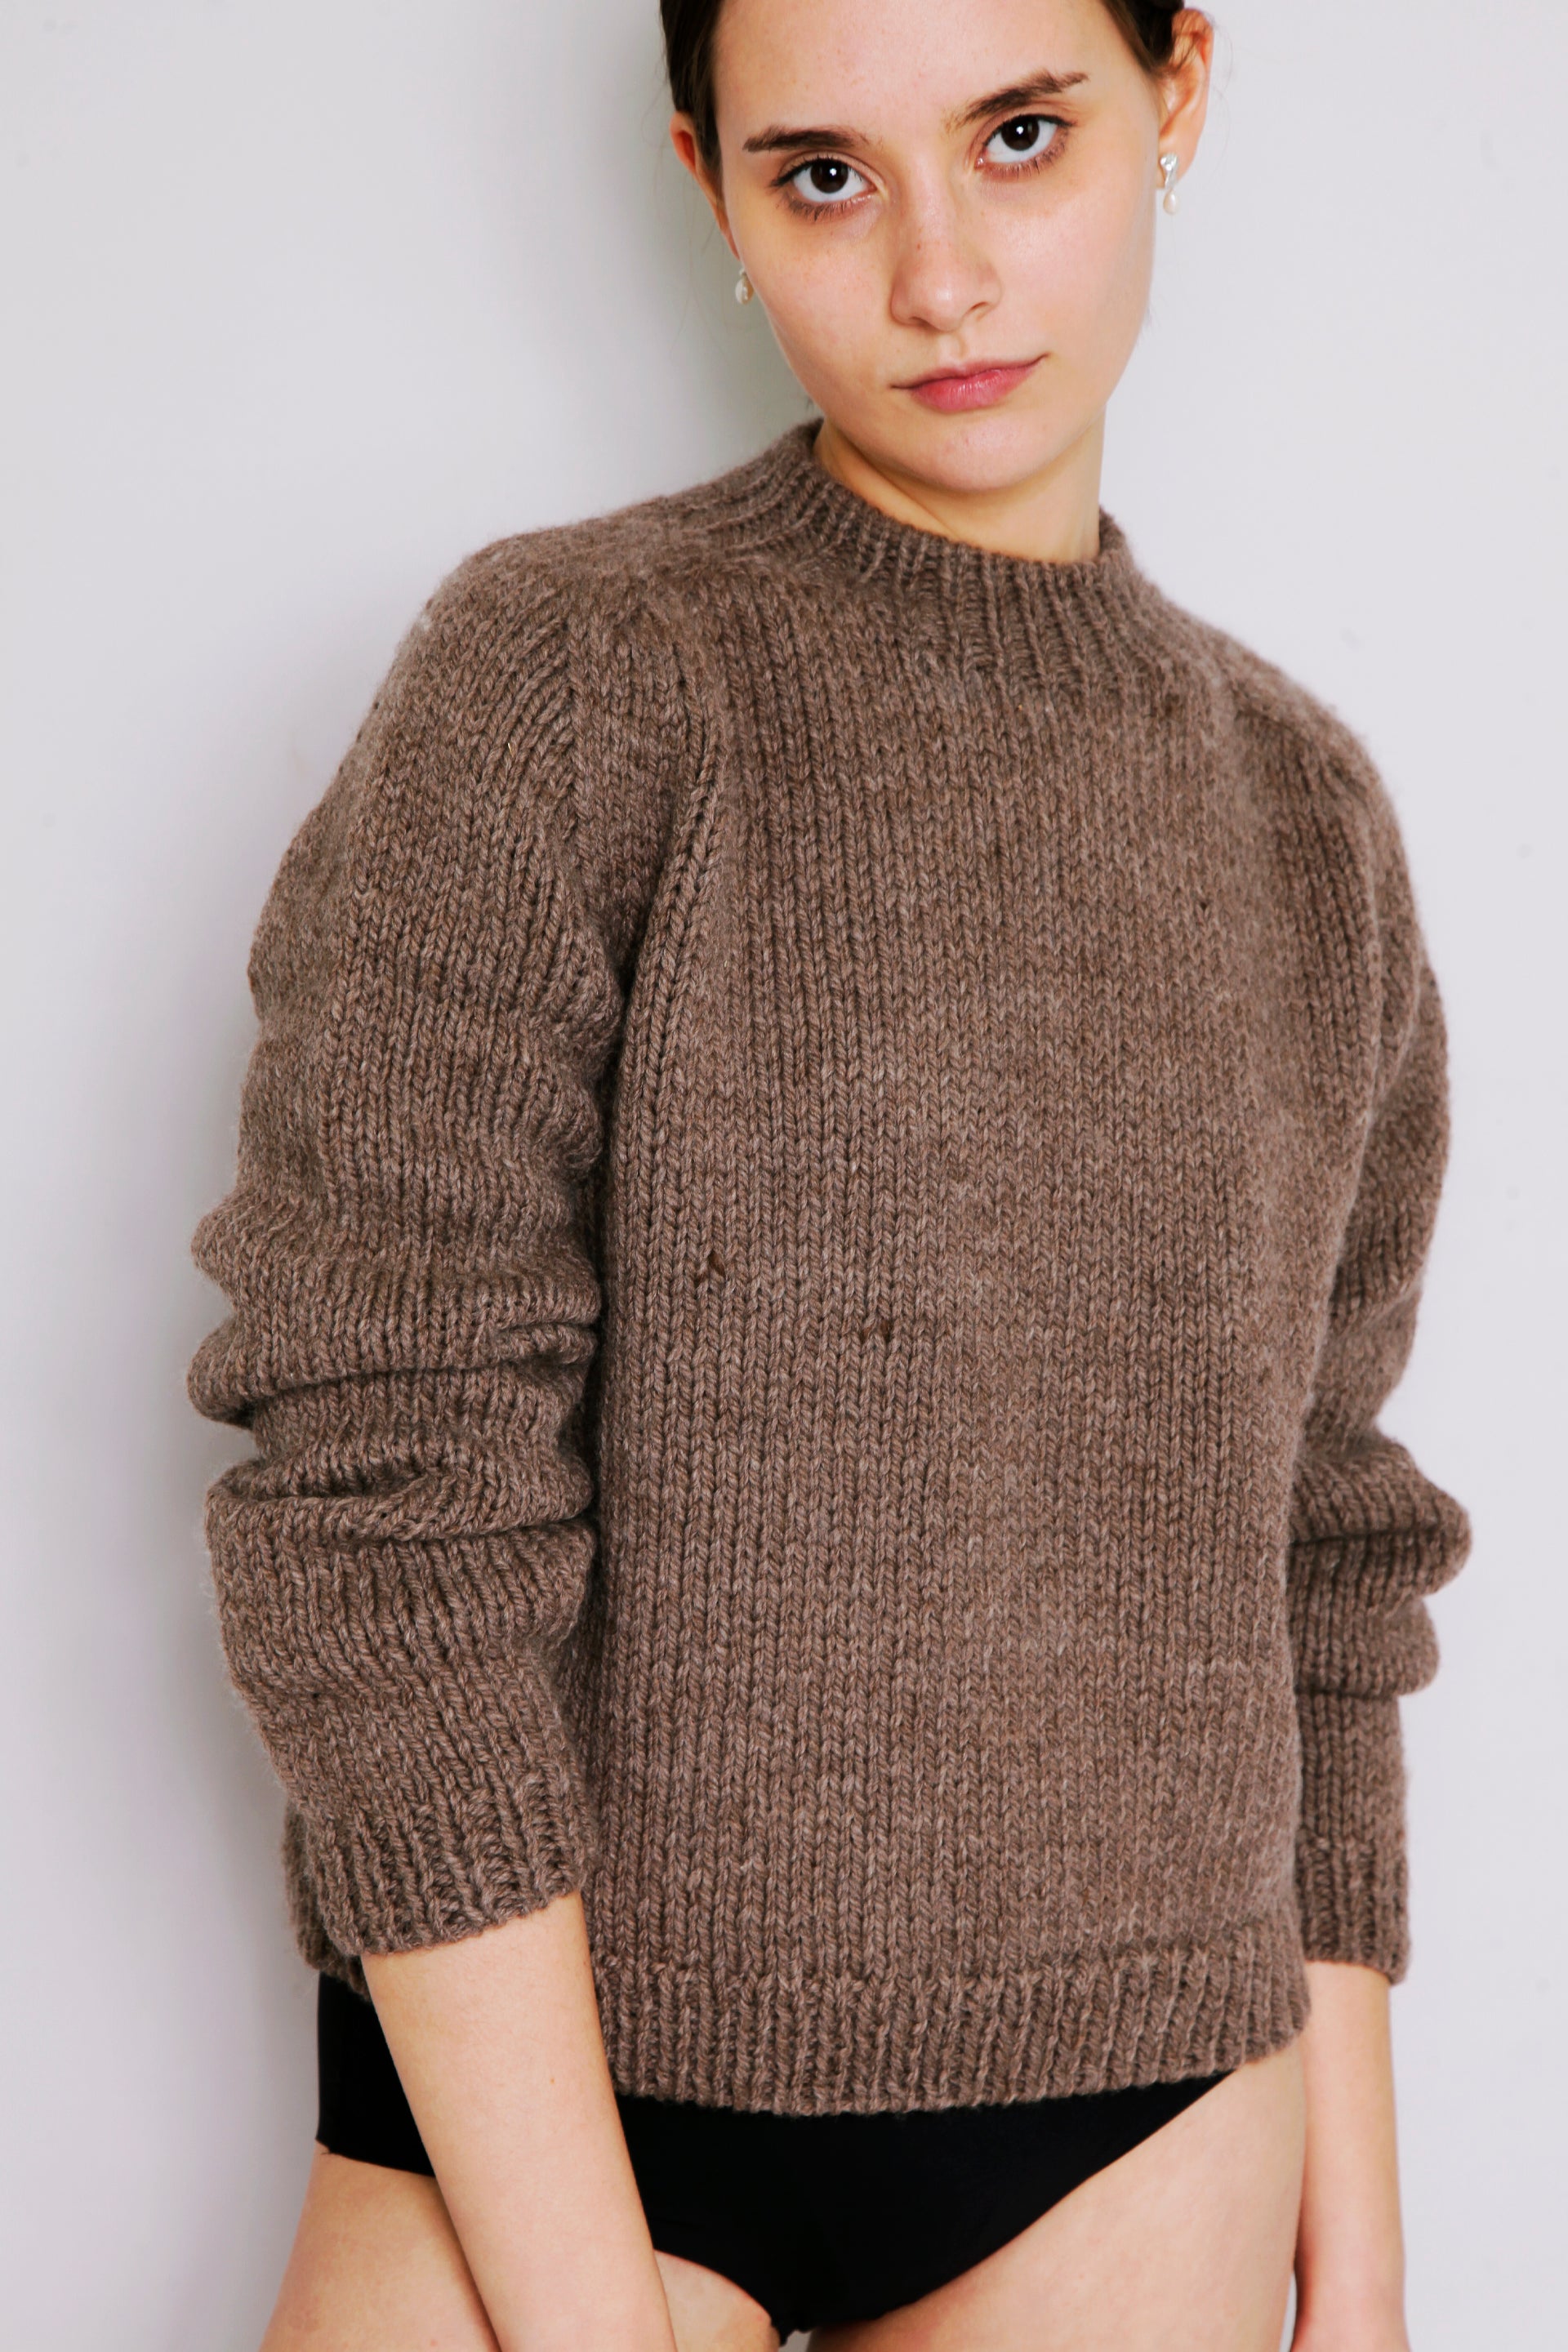 UNDYED, WOOL, HAND-KNITTED, JUMPER, SWEATER, JERSEY, STYLISH, SUSTAINABLE, HAND-CRAFTED, WOMENSWEAR 